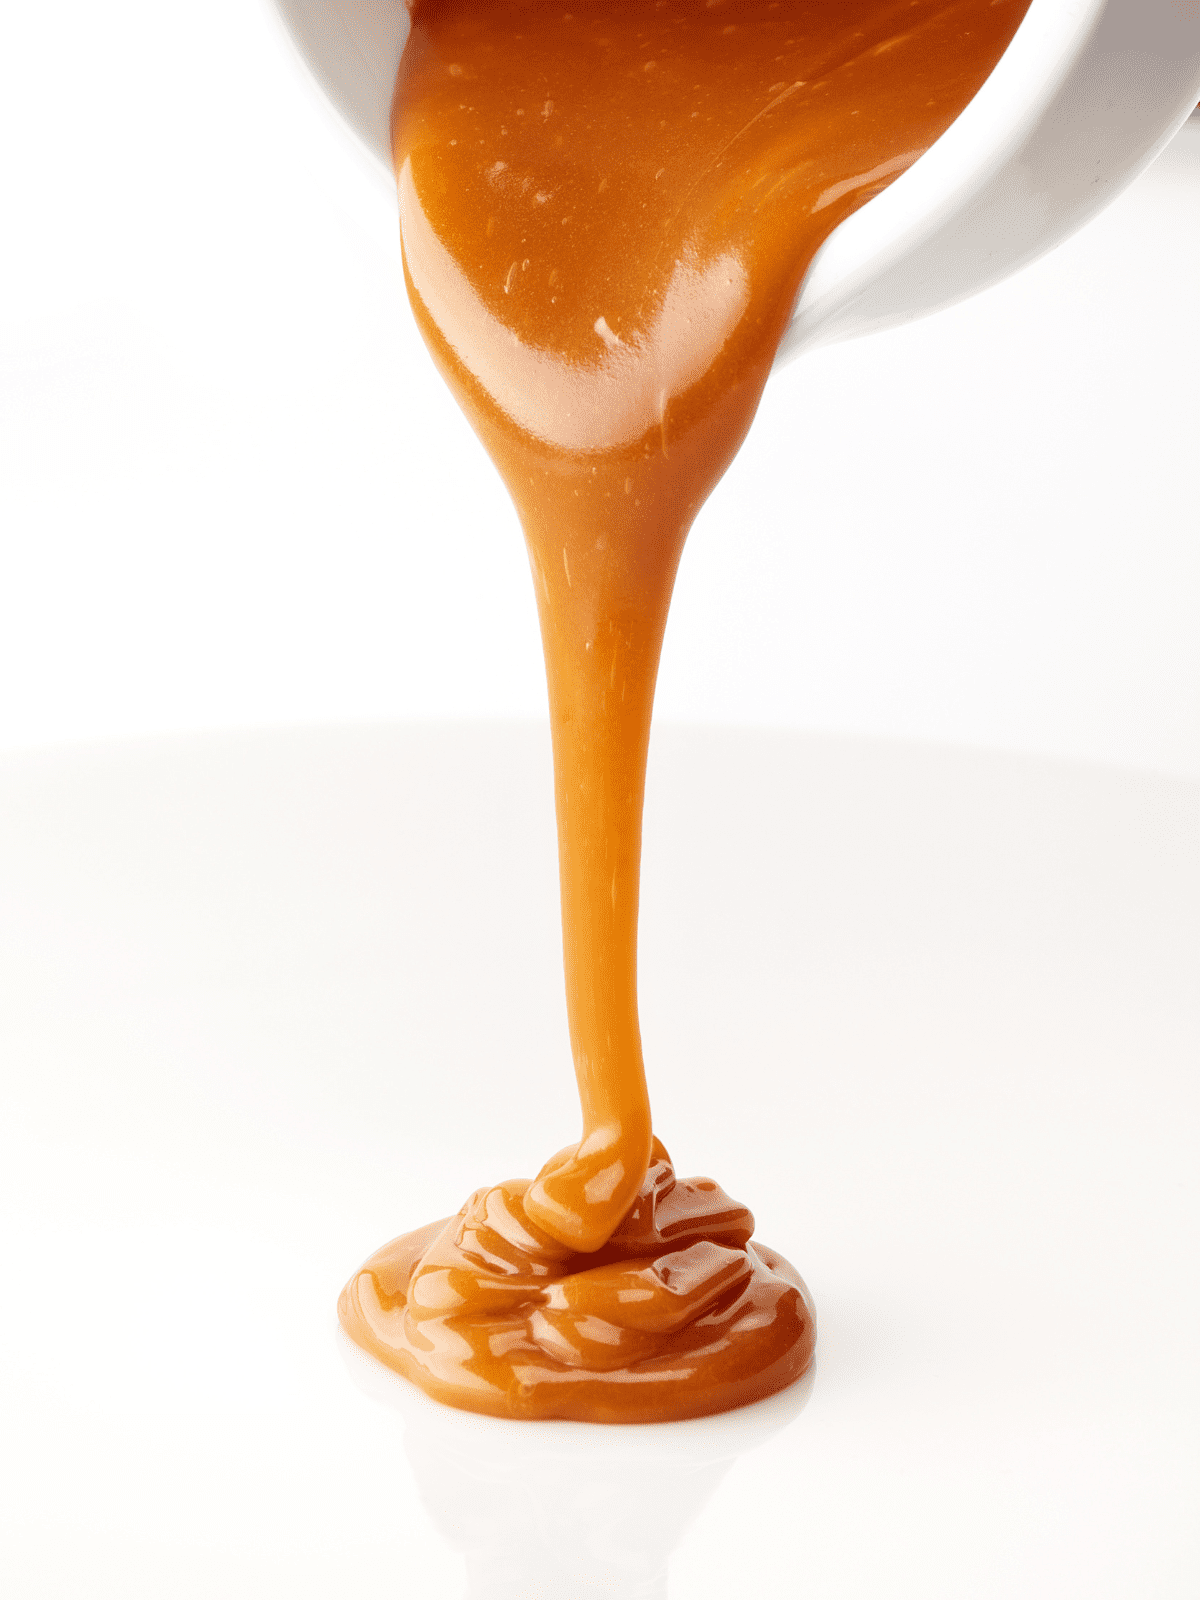 Caramel being poured on a table.